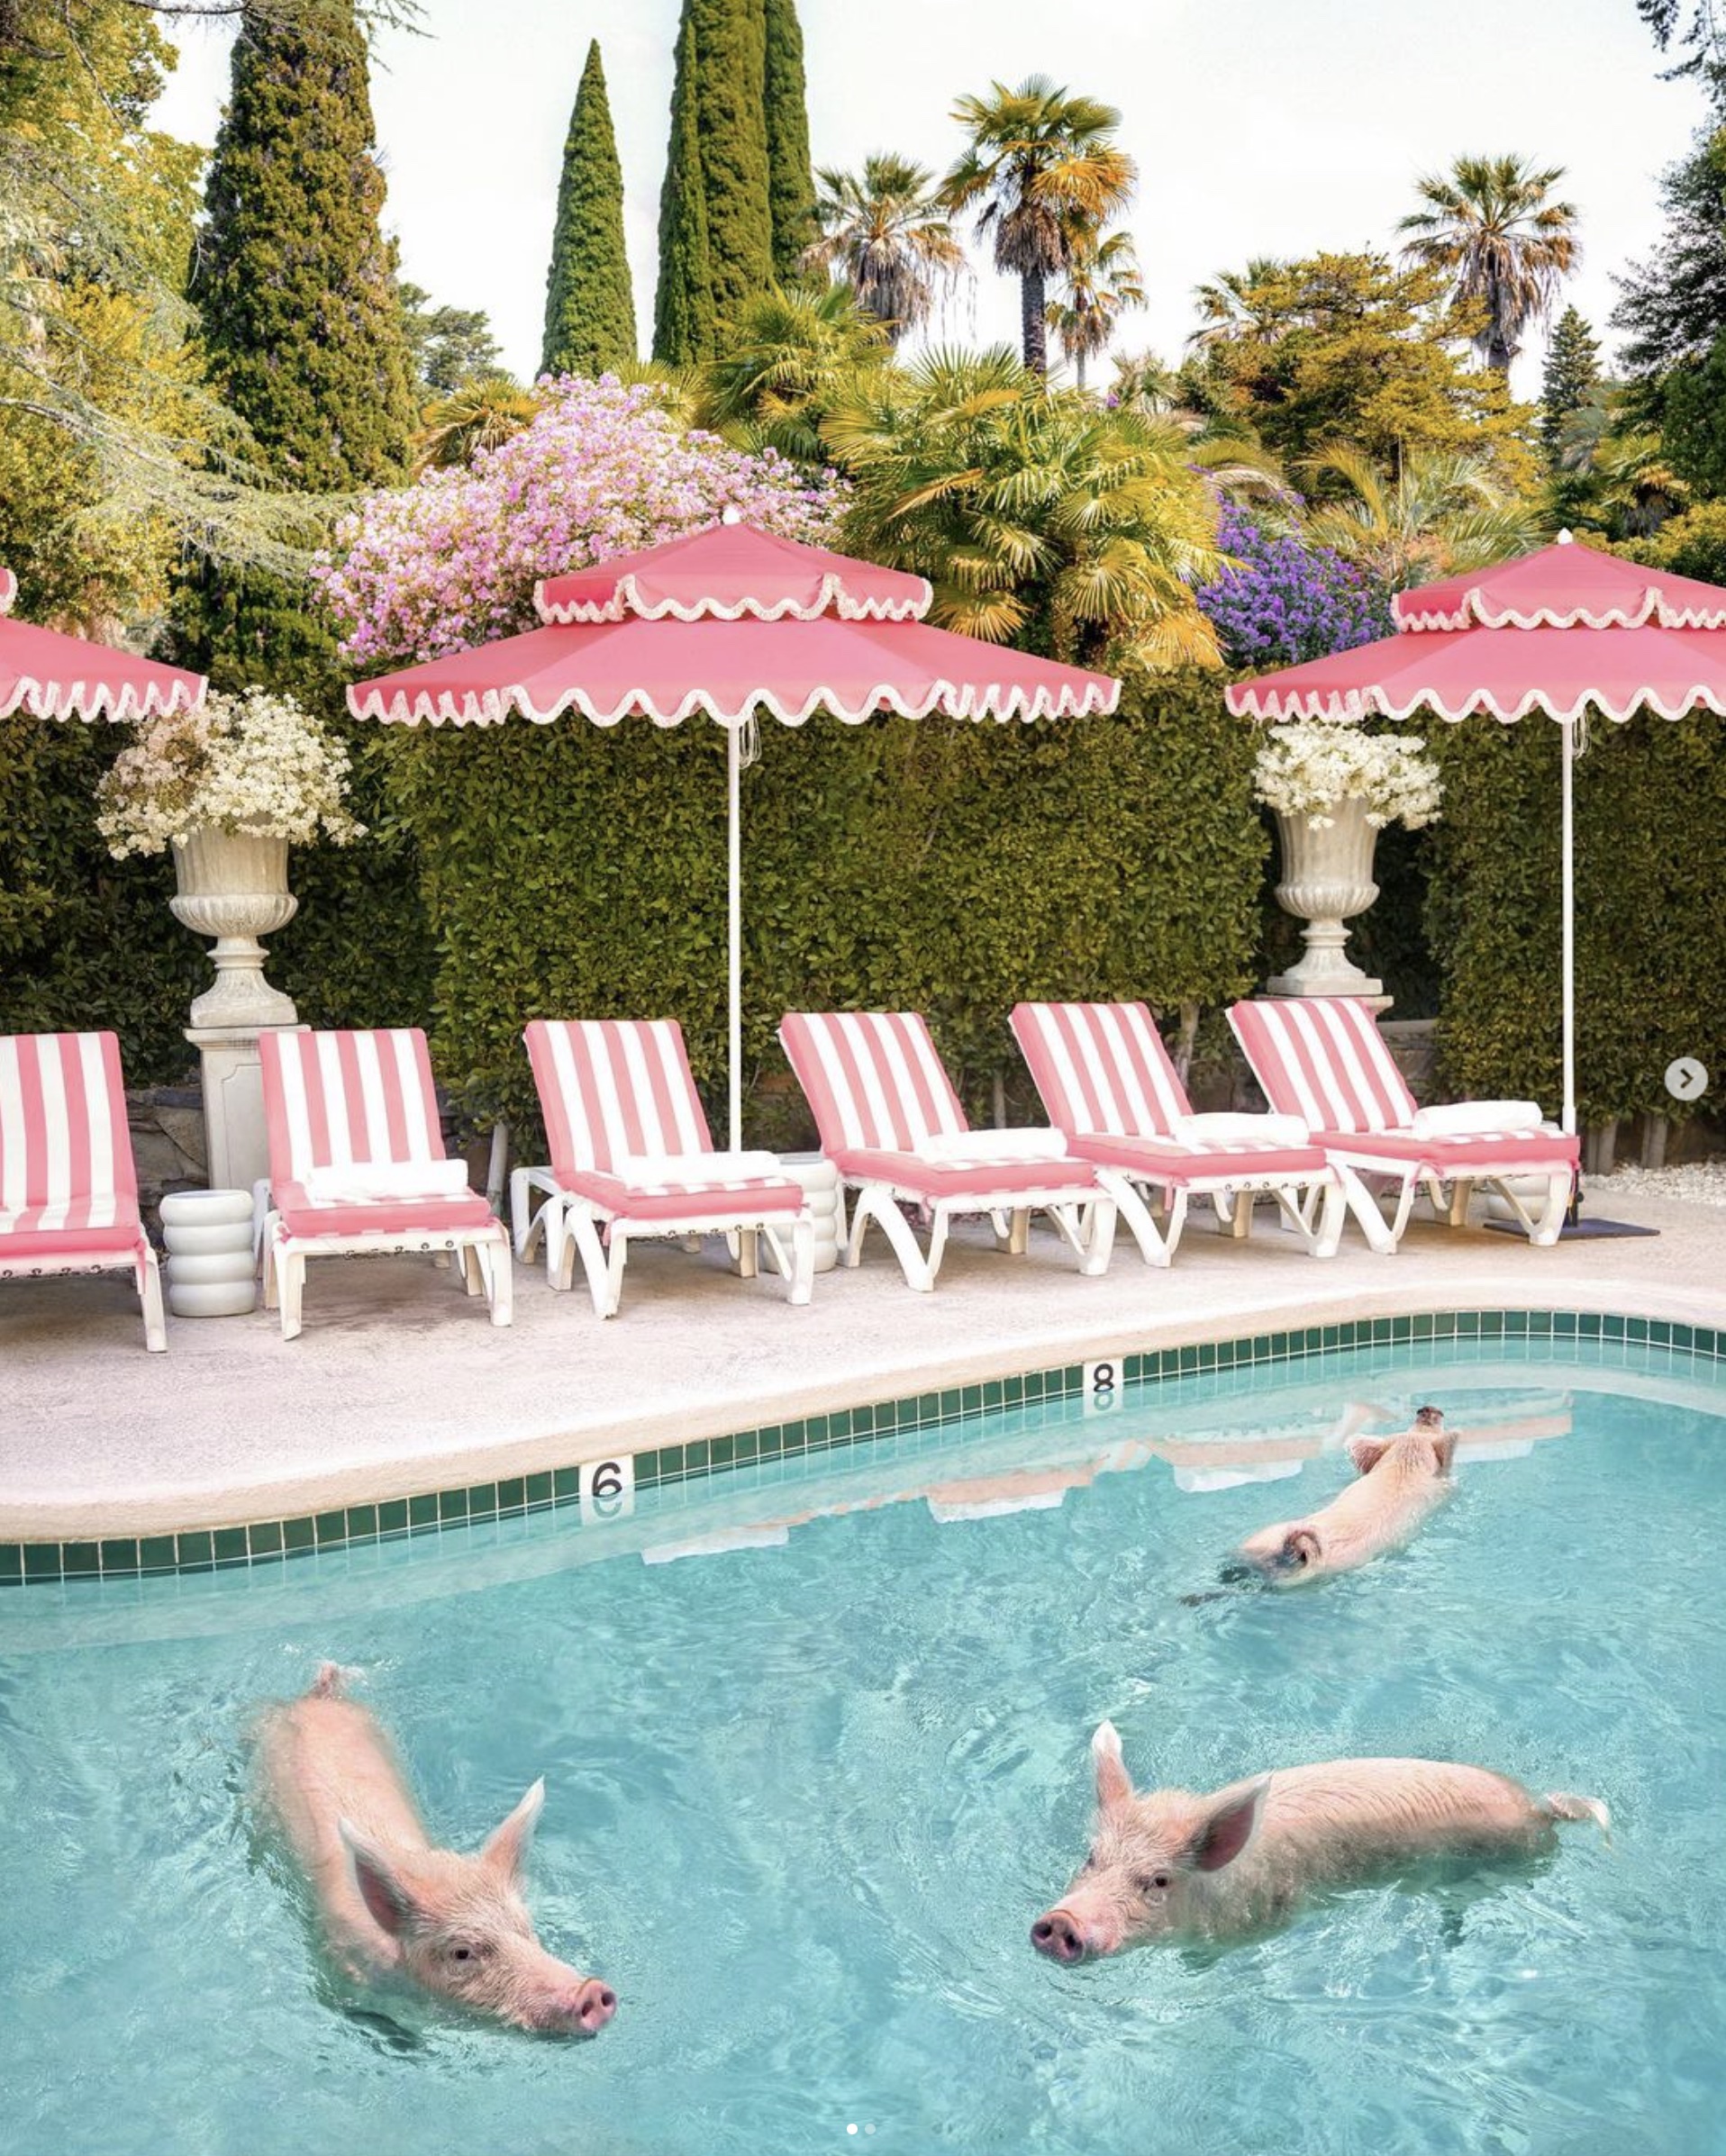 Image of Double Decker umbrellas with pigs